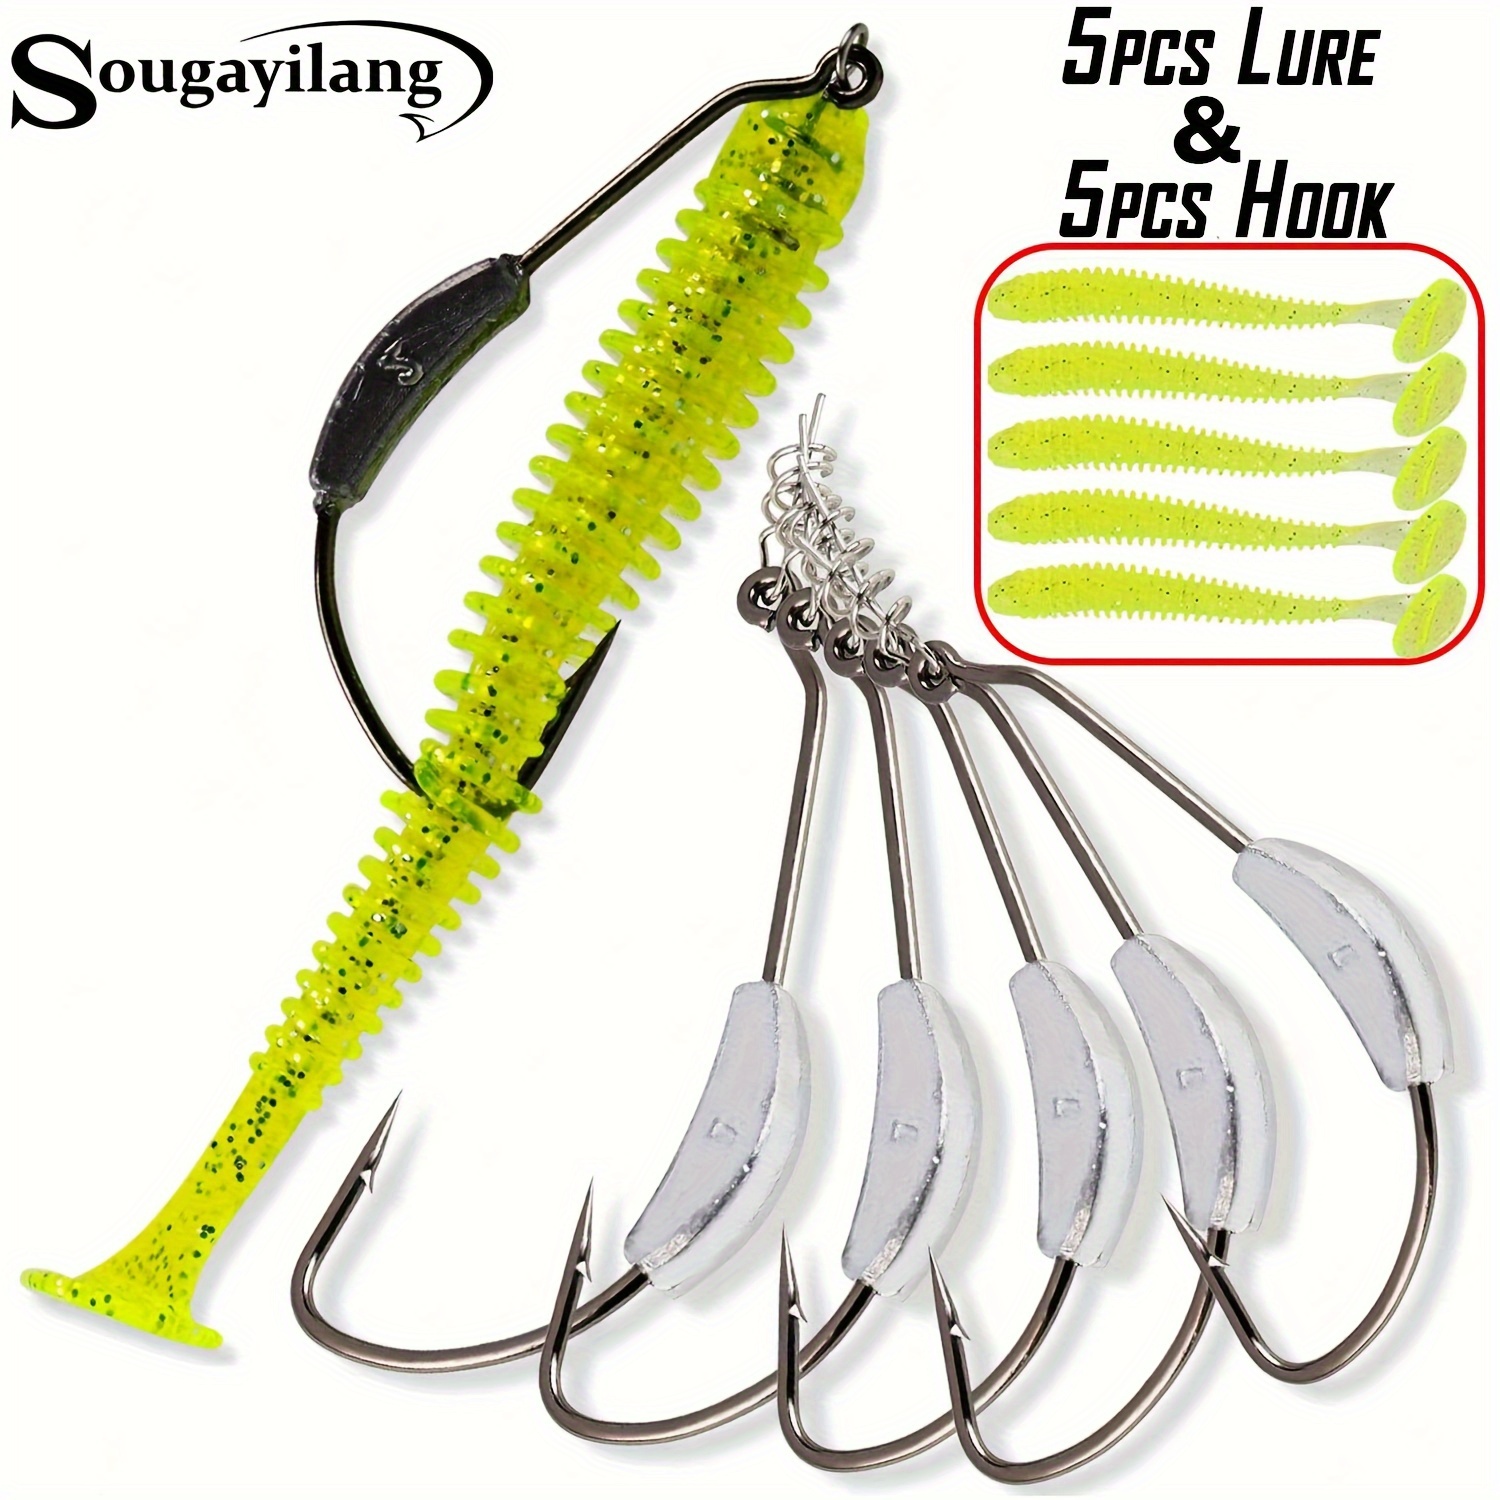 Premium Bass Fishing Hooks - 5 Sizes, Barbless, Freshwater and Saltwater,  Black Nickel Finish, Ideal for Soft Lure Baits - Includes Clear Storage Box